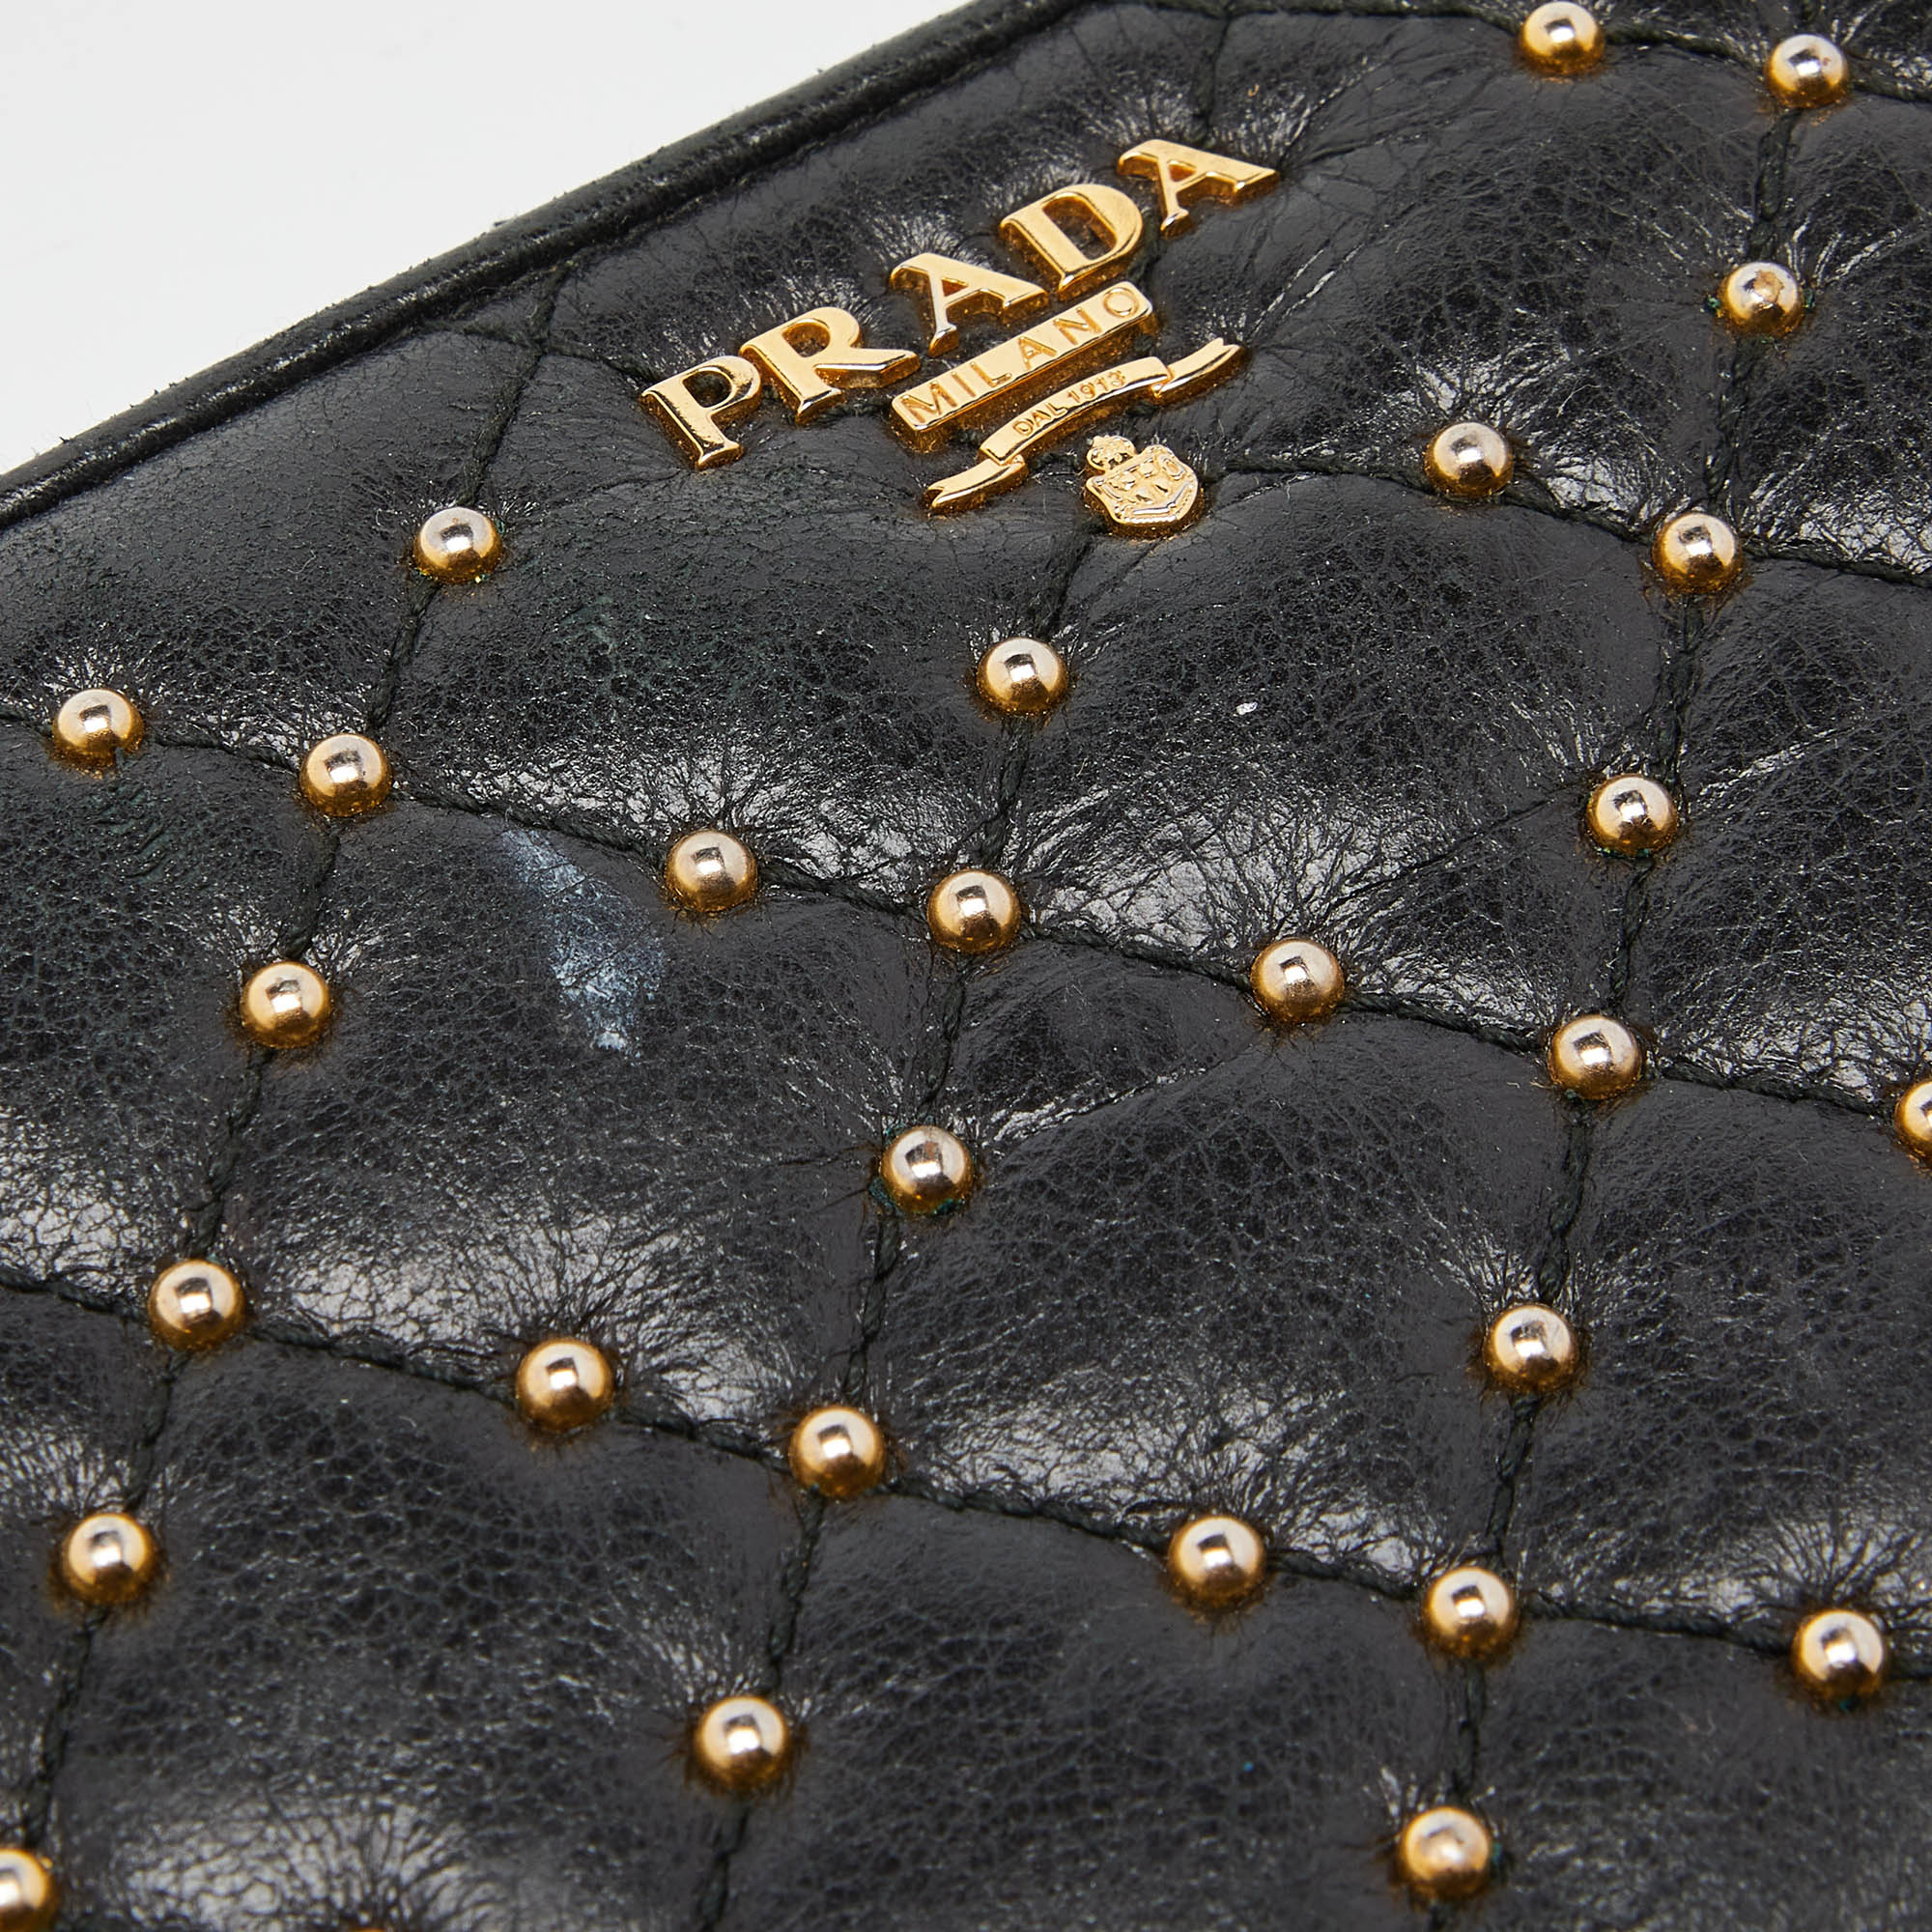 Prada Black Quilted Leather Studded Continental Wallet